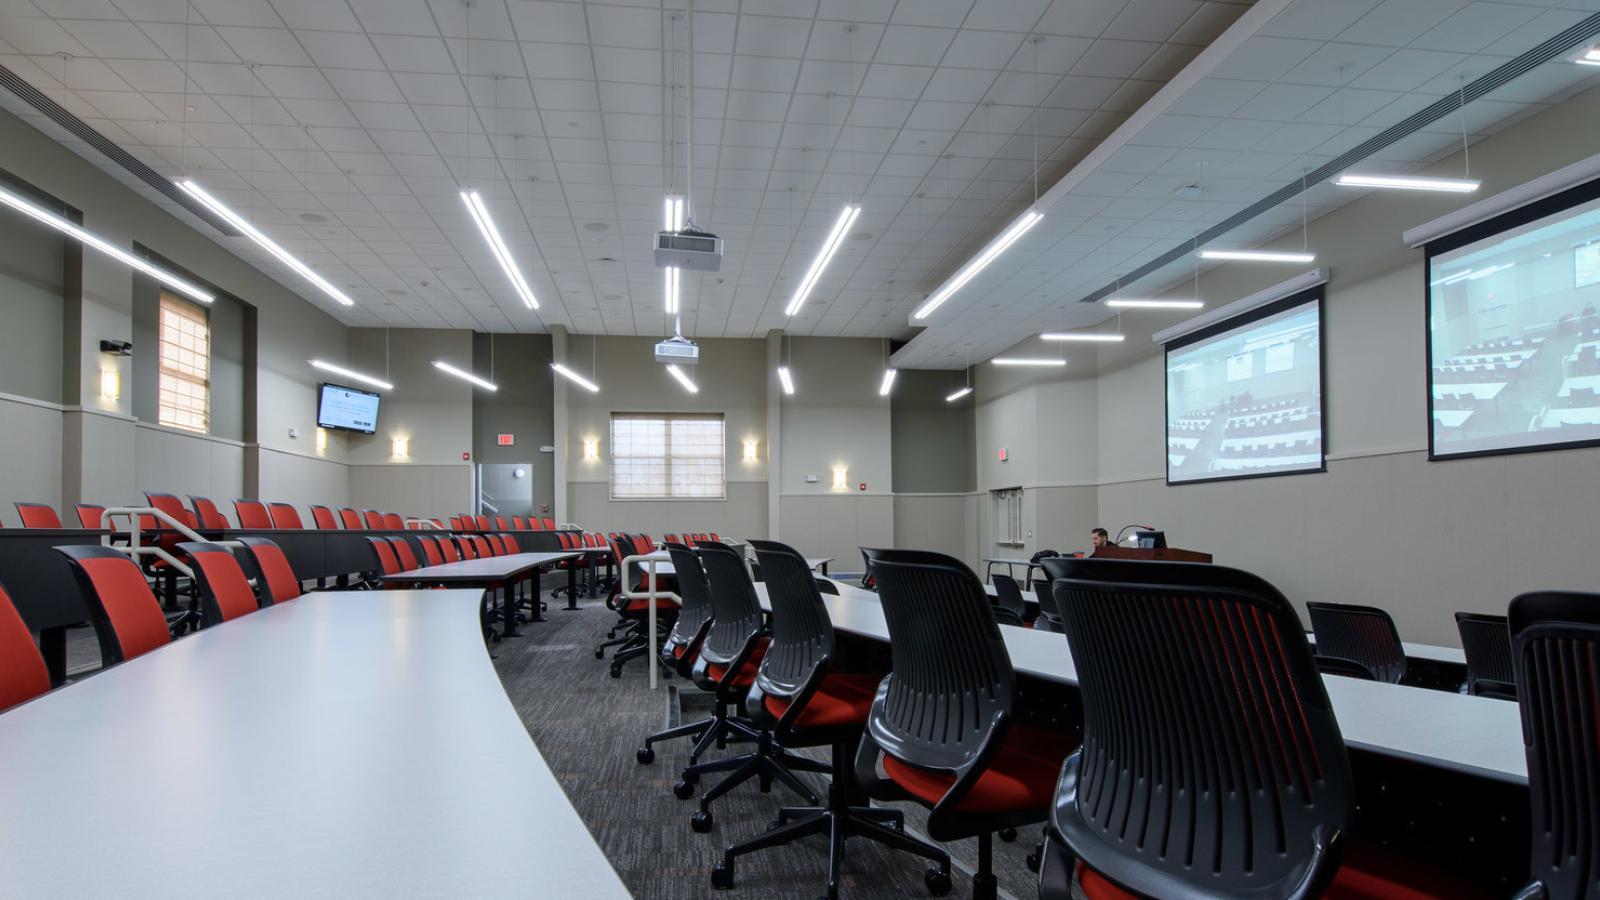 Large Classroom with 2 Projectors and Multiple TV Displays